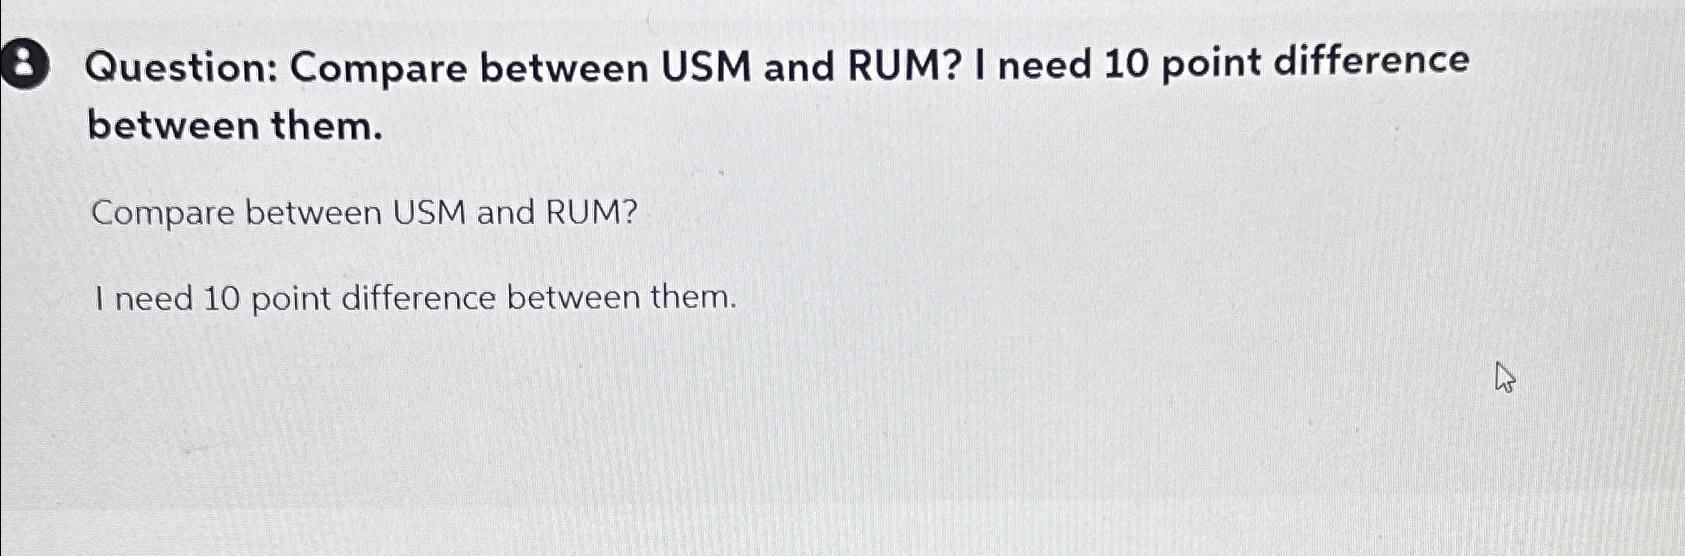 Question: Compare between USM and RUM? I need 10 point difference between them. Compare between USM and RUM?